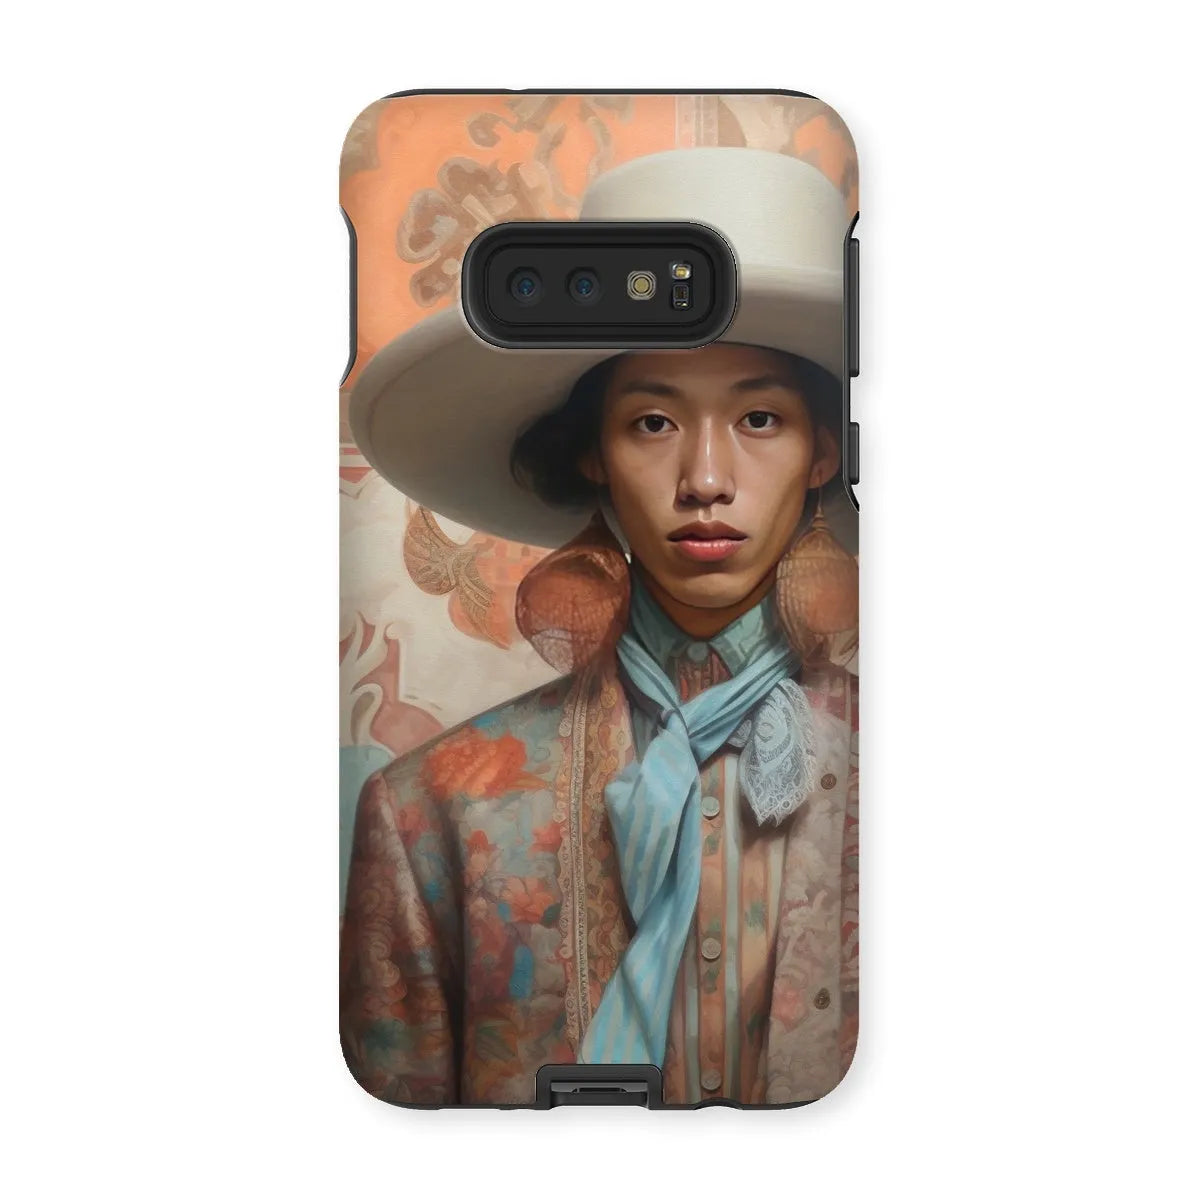 Iyaan - Gay Malay Asian Cowboy Aesthetic Art Phone Case - Samsung Galaxy S10e / Matte - Mobile Phone Cases - Aesthetic